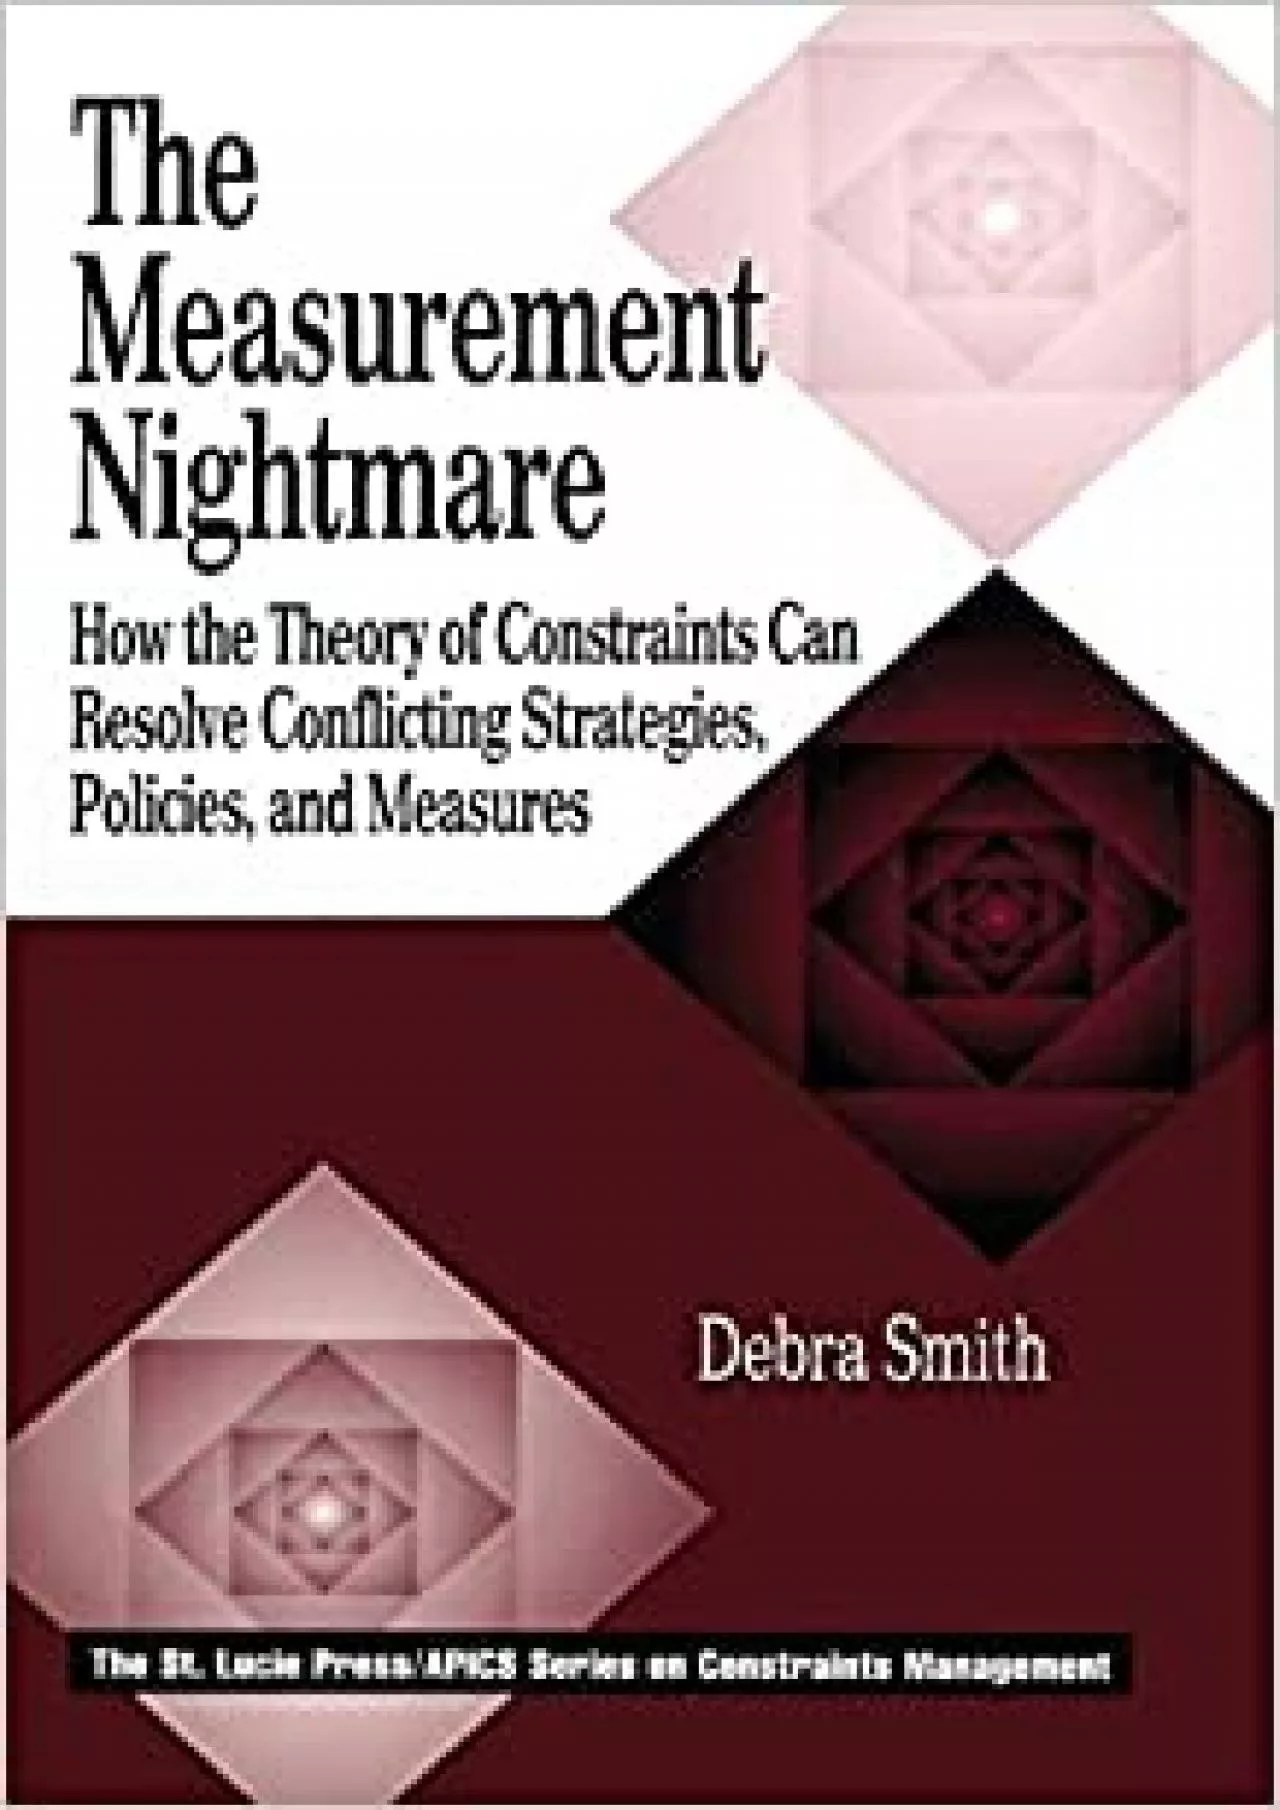 The Measurement Nightmare: How the Theory of Constraints Can Resolve Conflicting Strategies